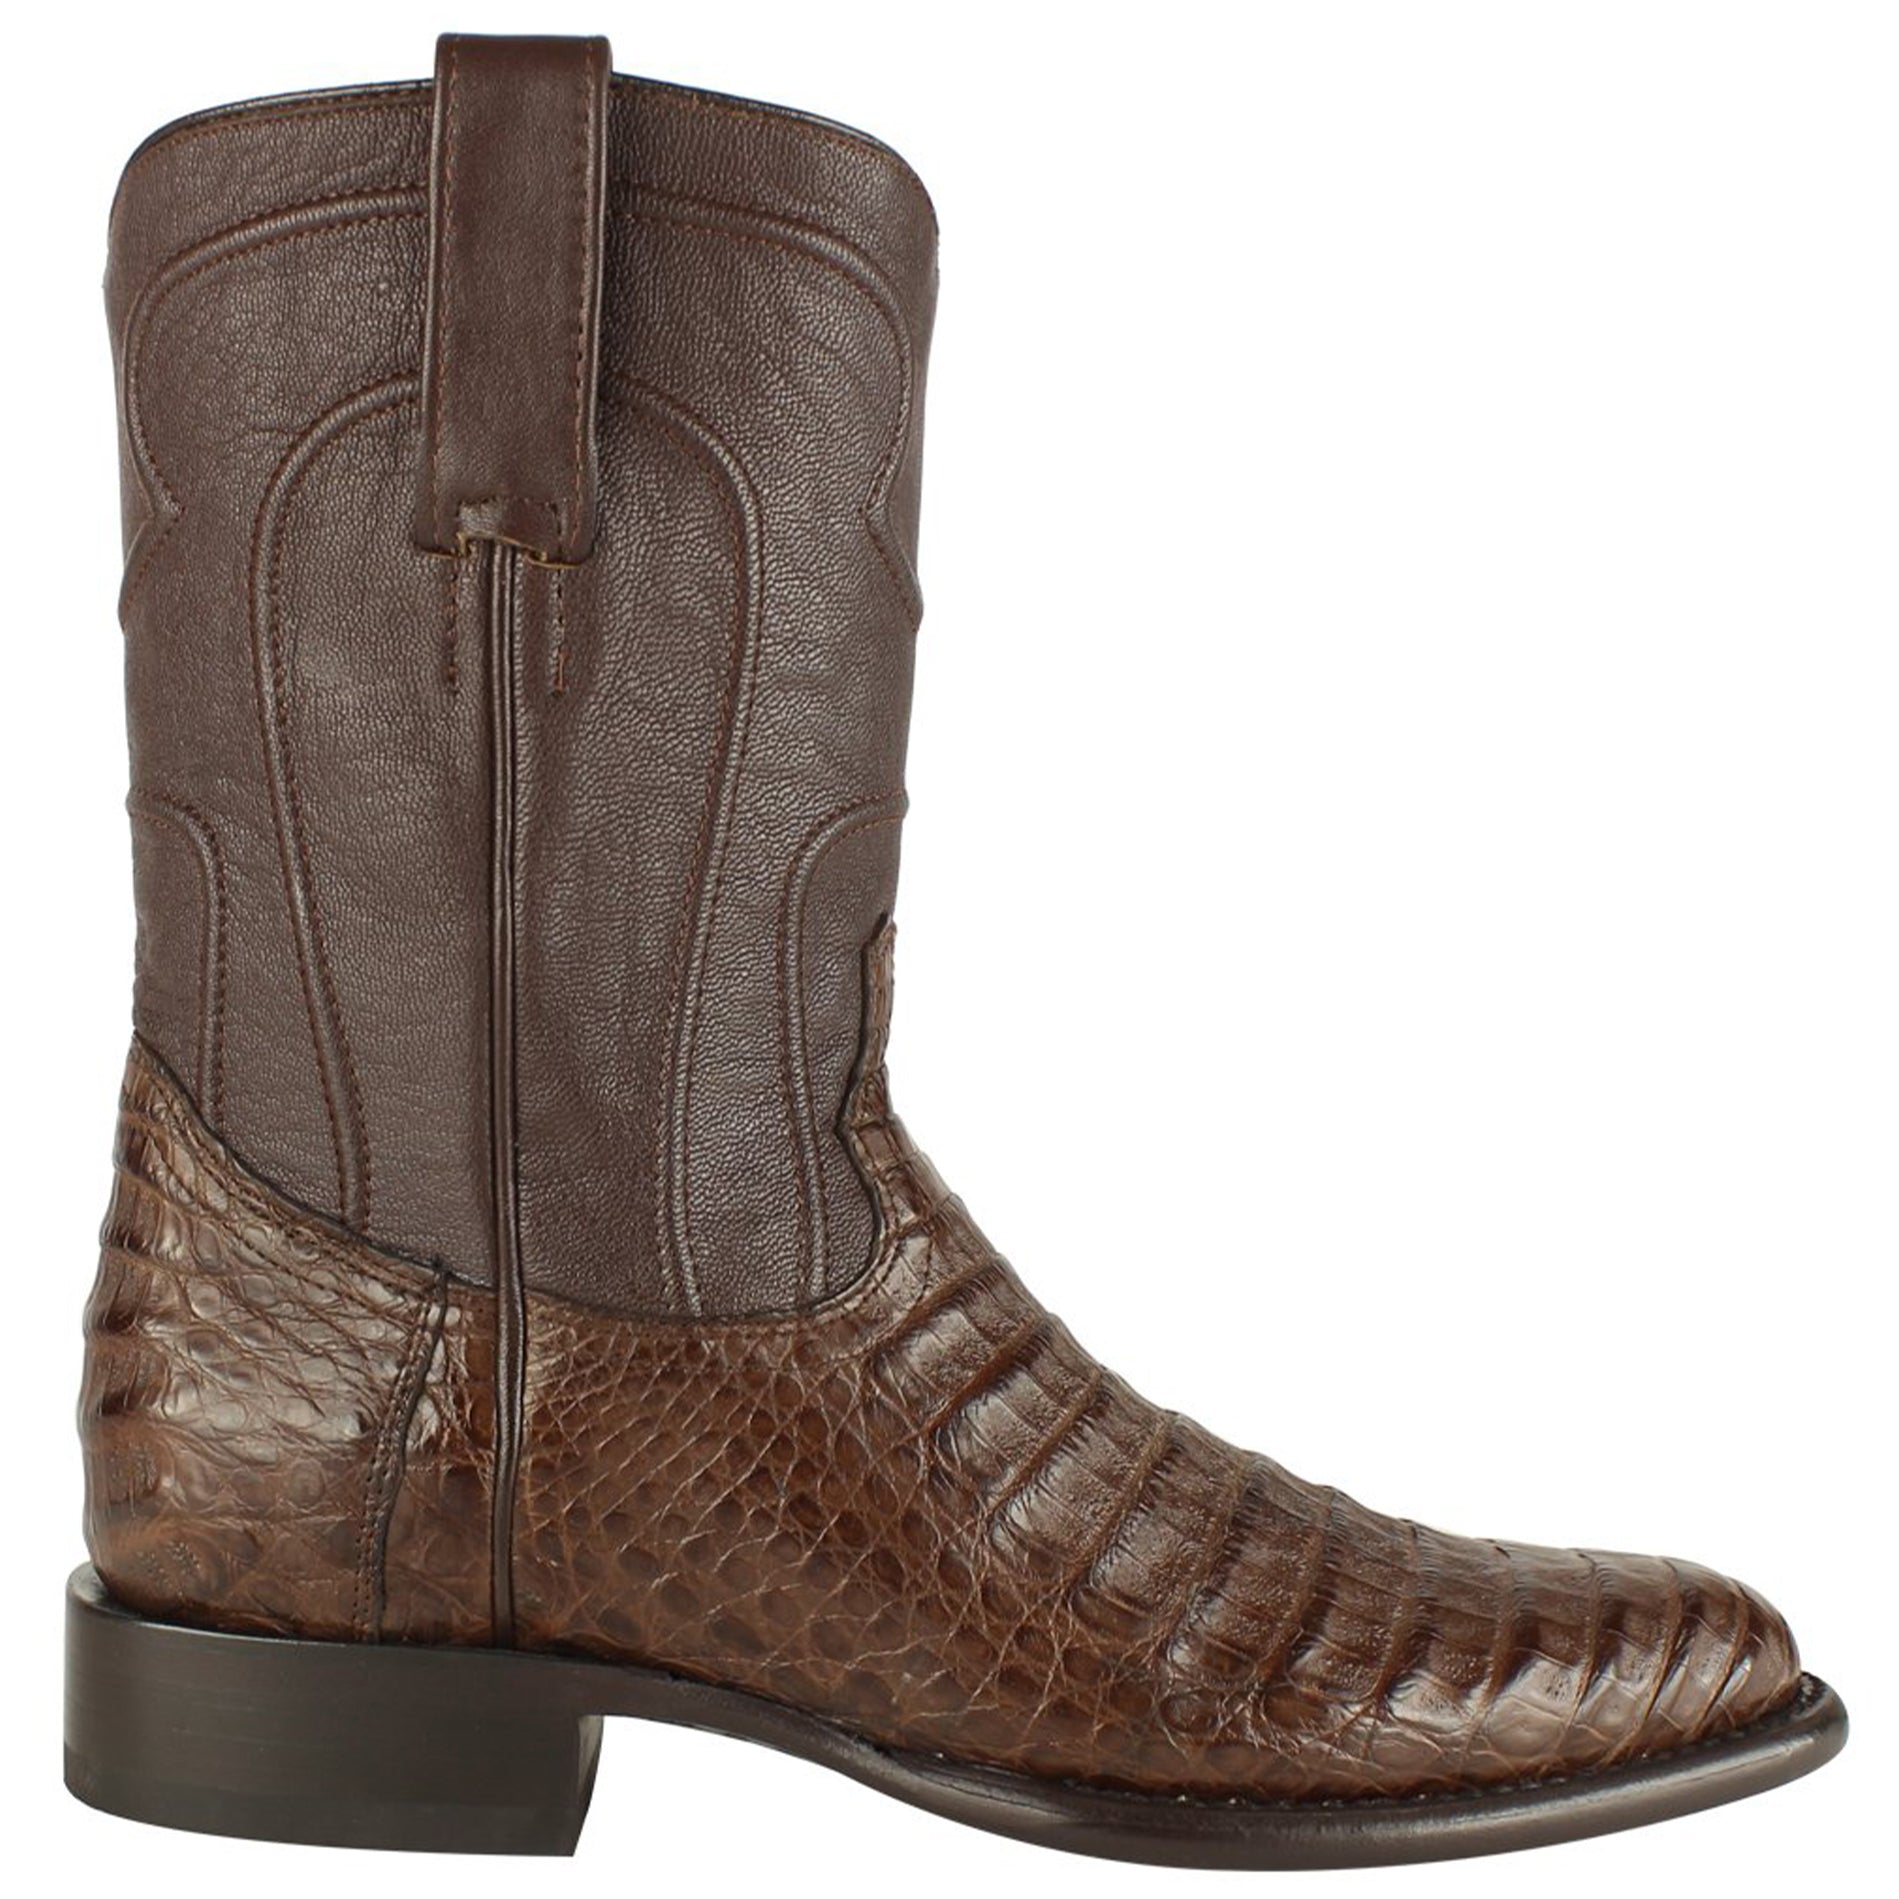 Brown caiman roper boots side view